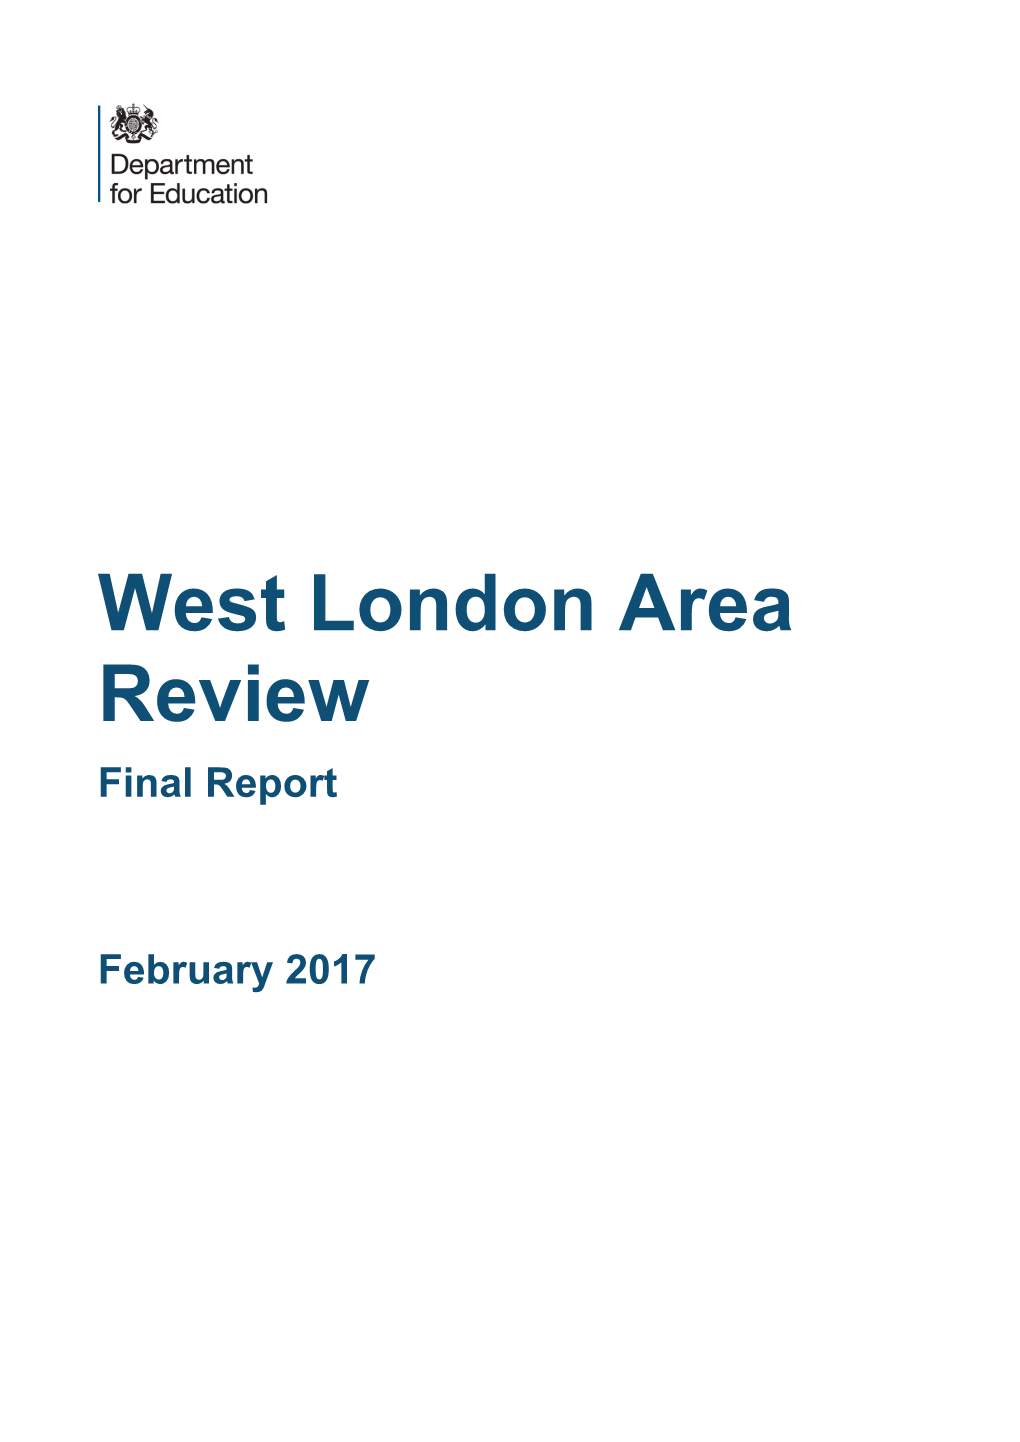 West London Area Review Final Report